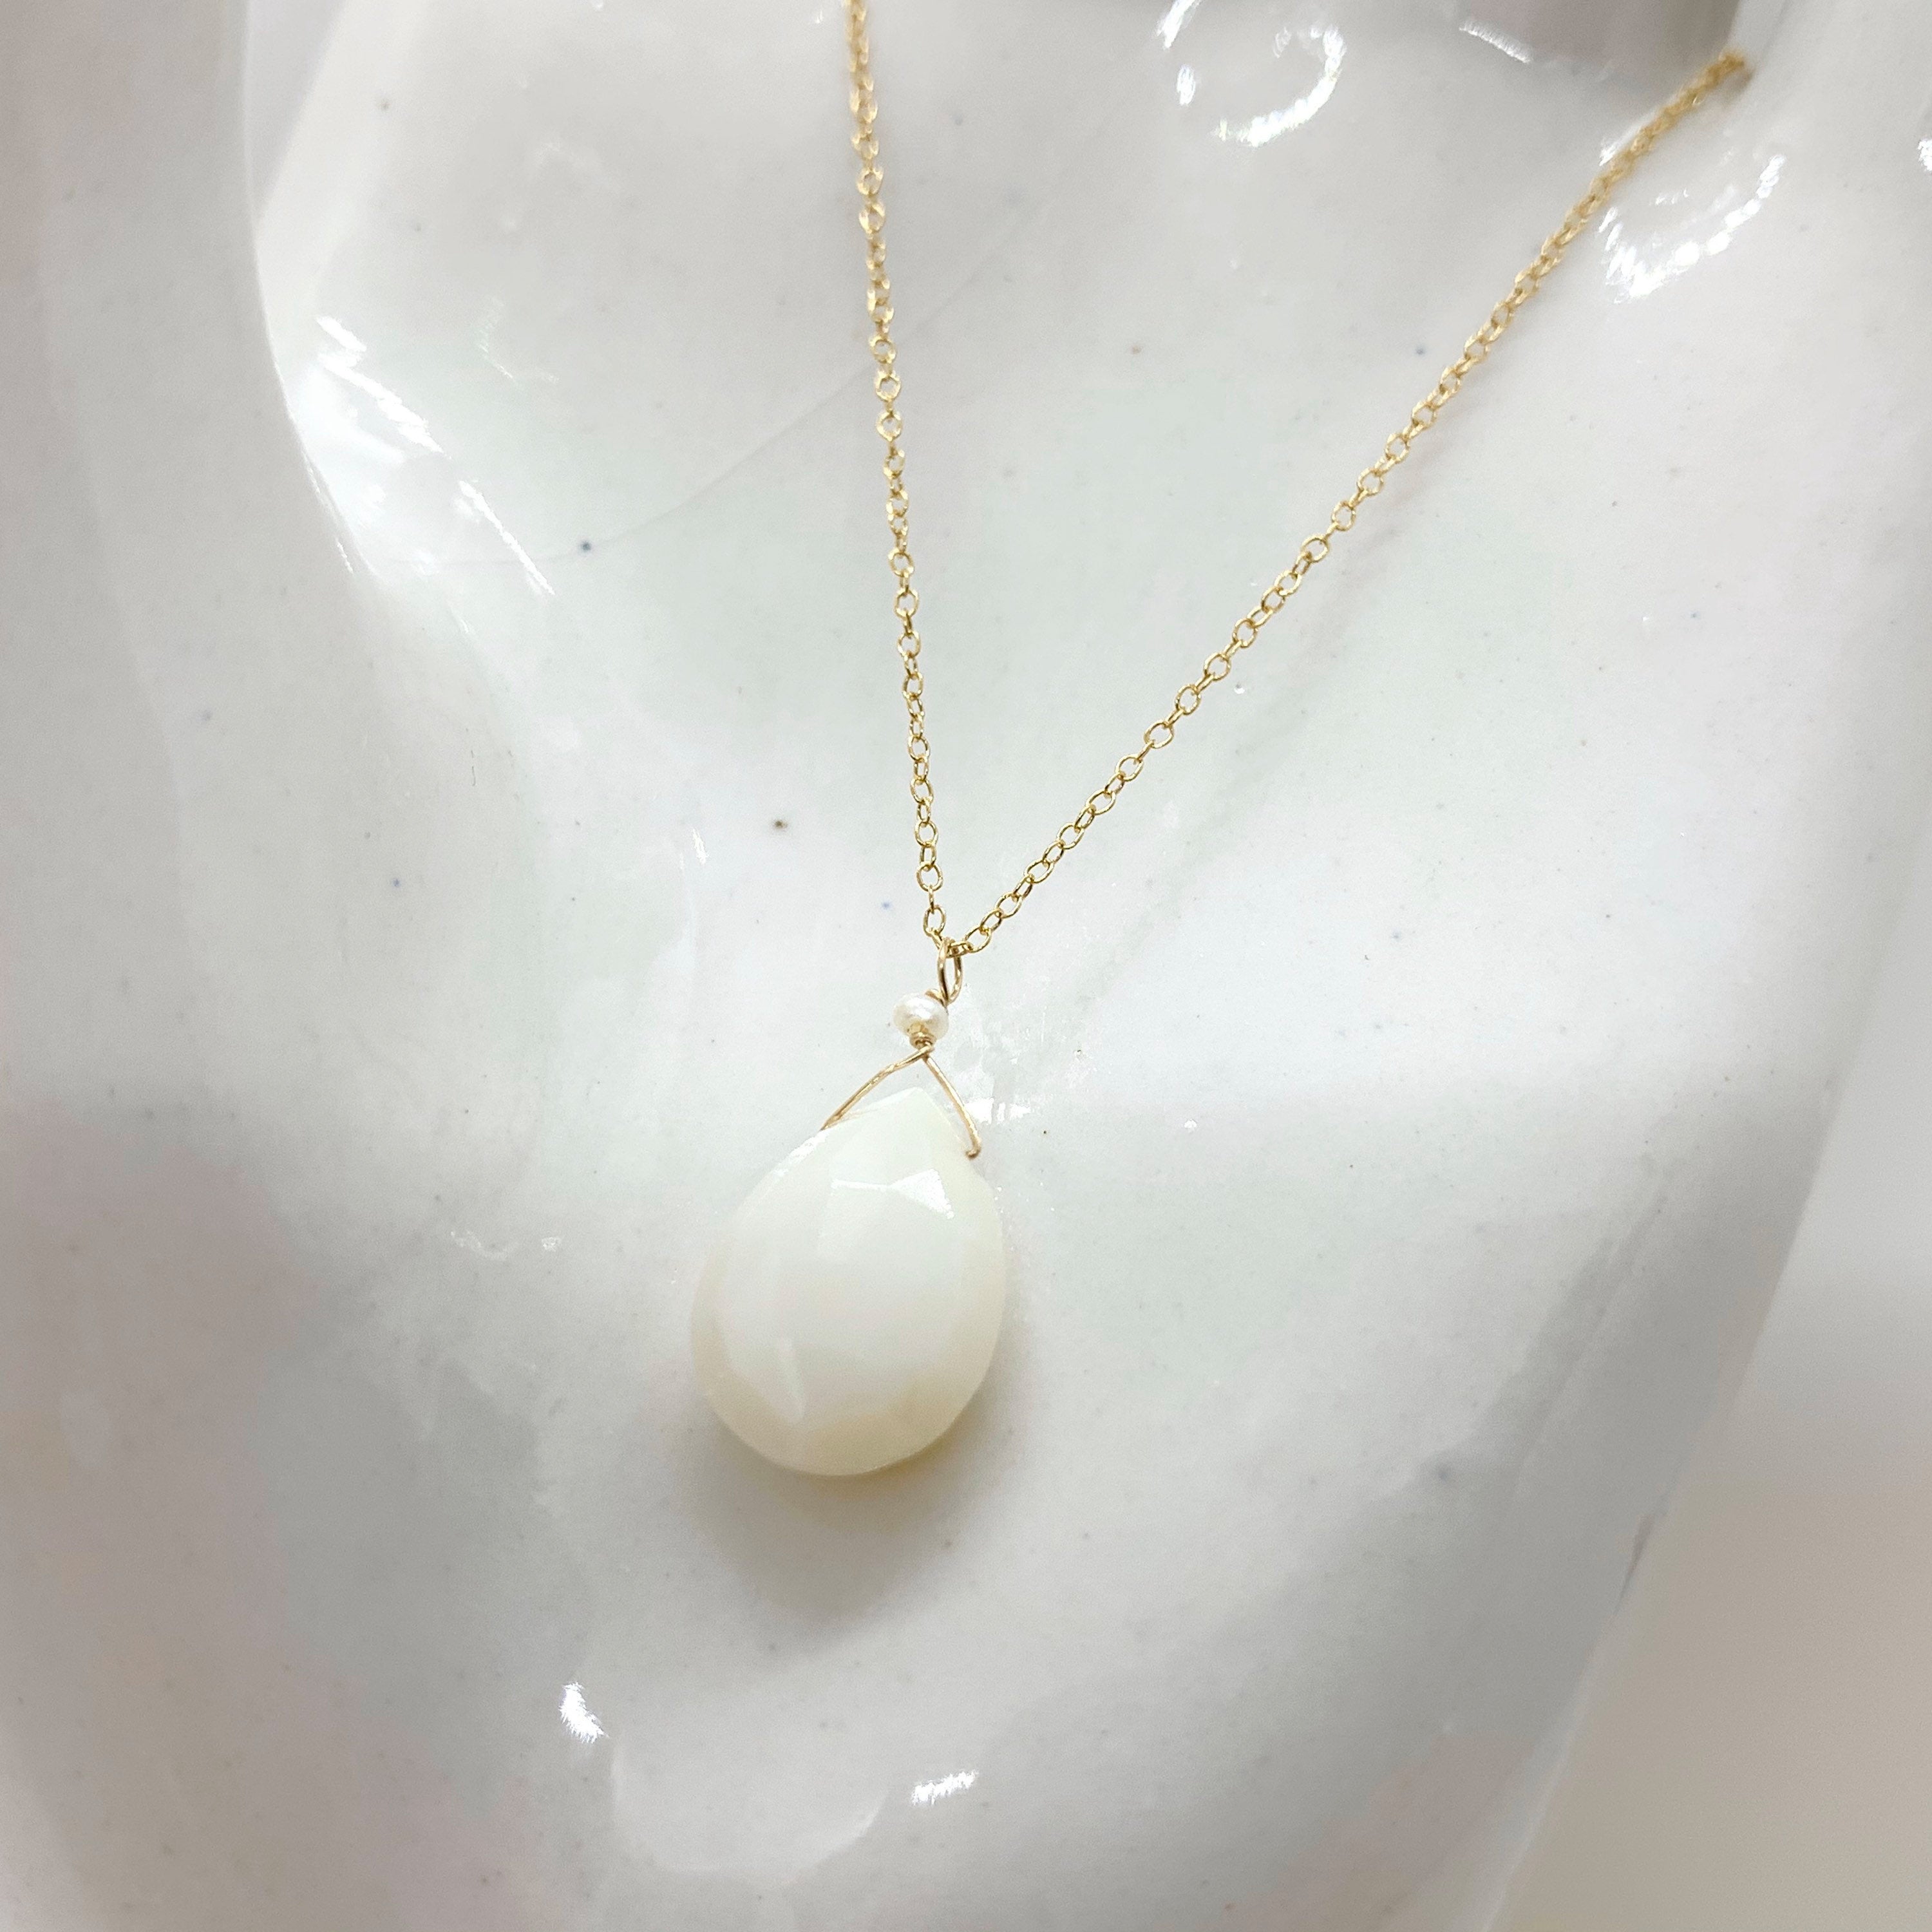 14k Gold Chain Necklace w/ White Opal